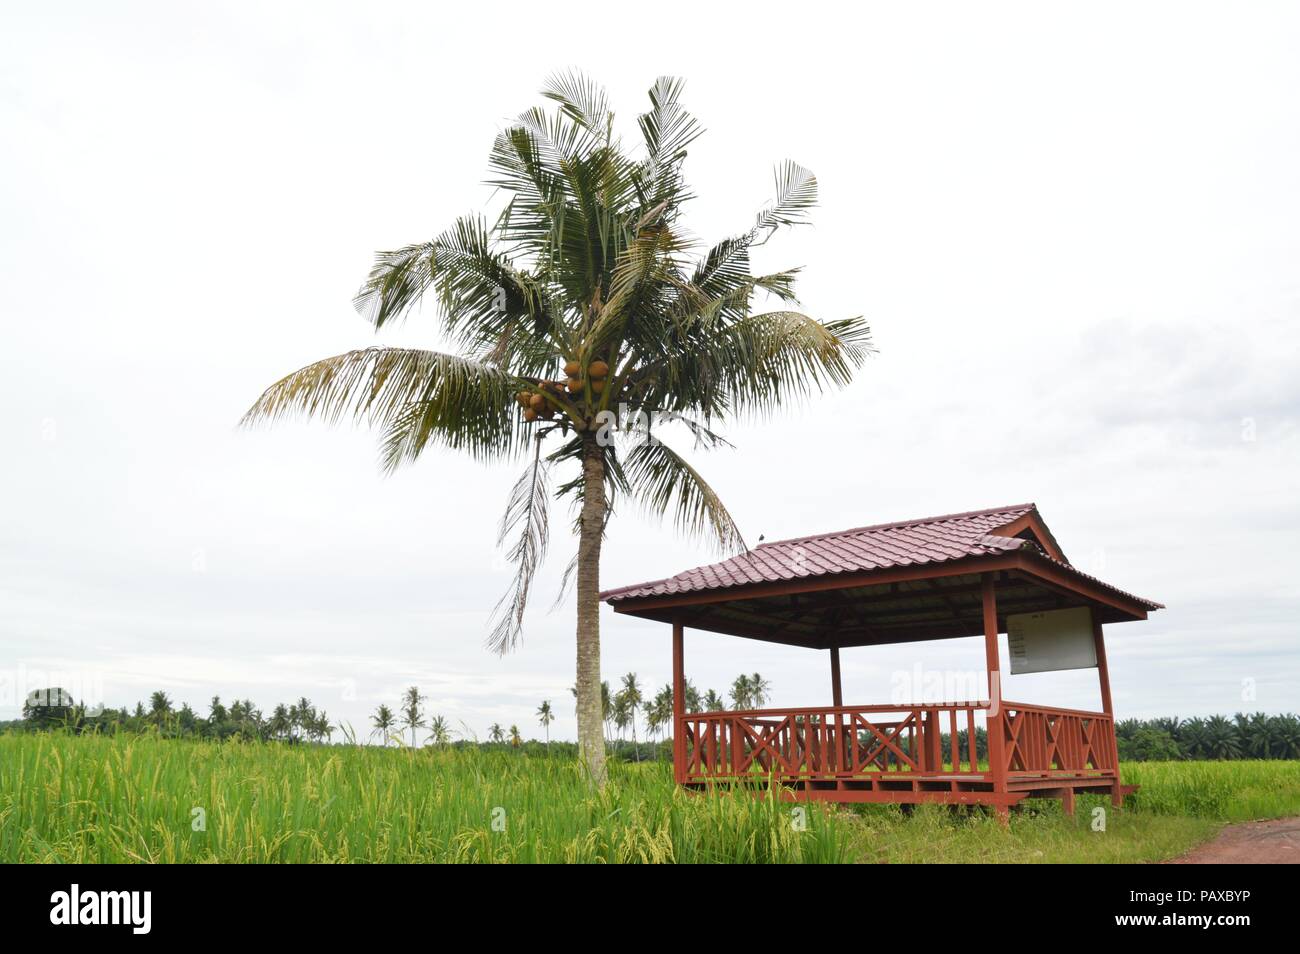 the restplace at the paddyfield Stock Photo